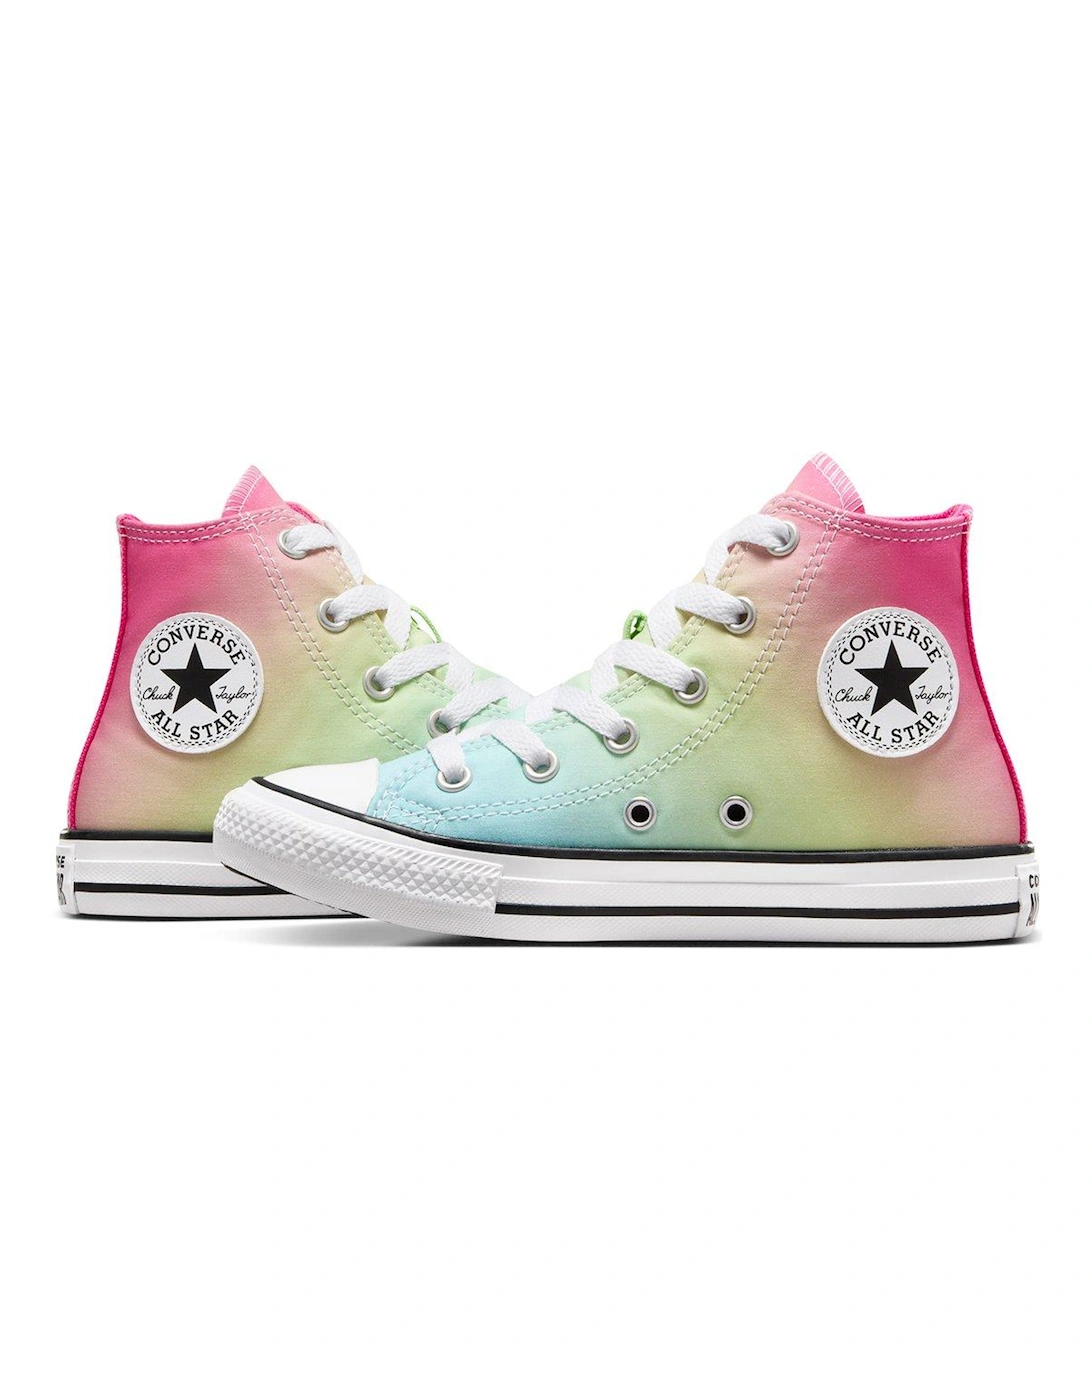 Kids Girls Hyper Brights High Tops Trainers - Turquoise/Pink